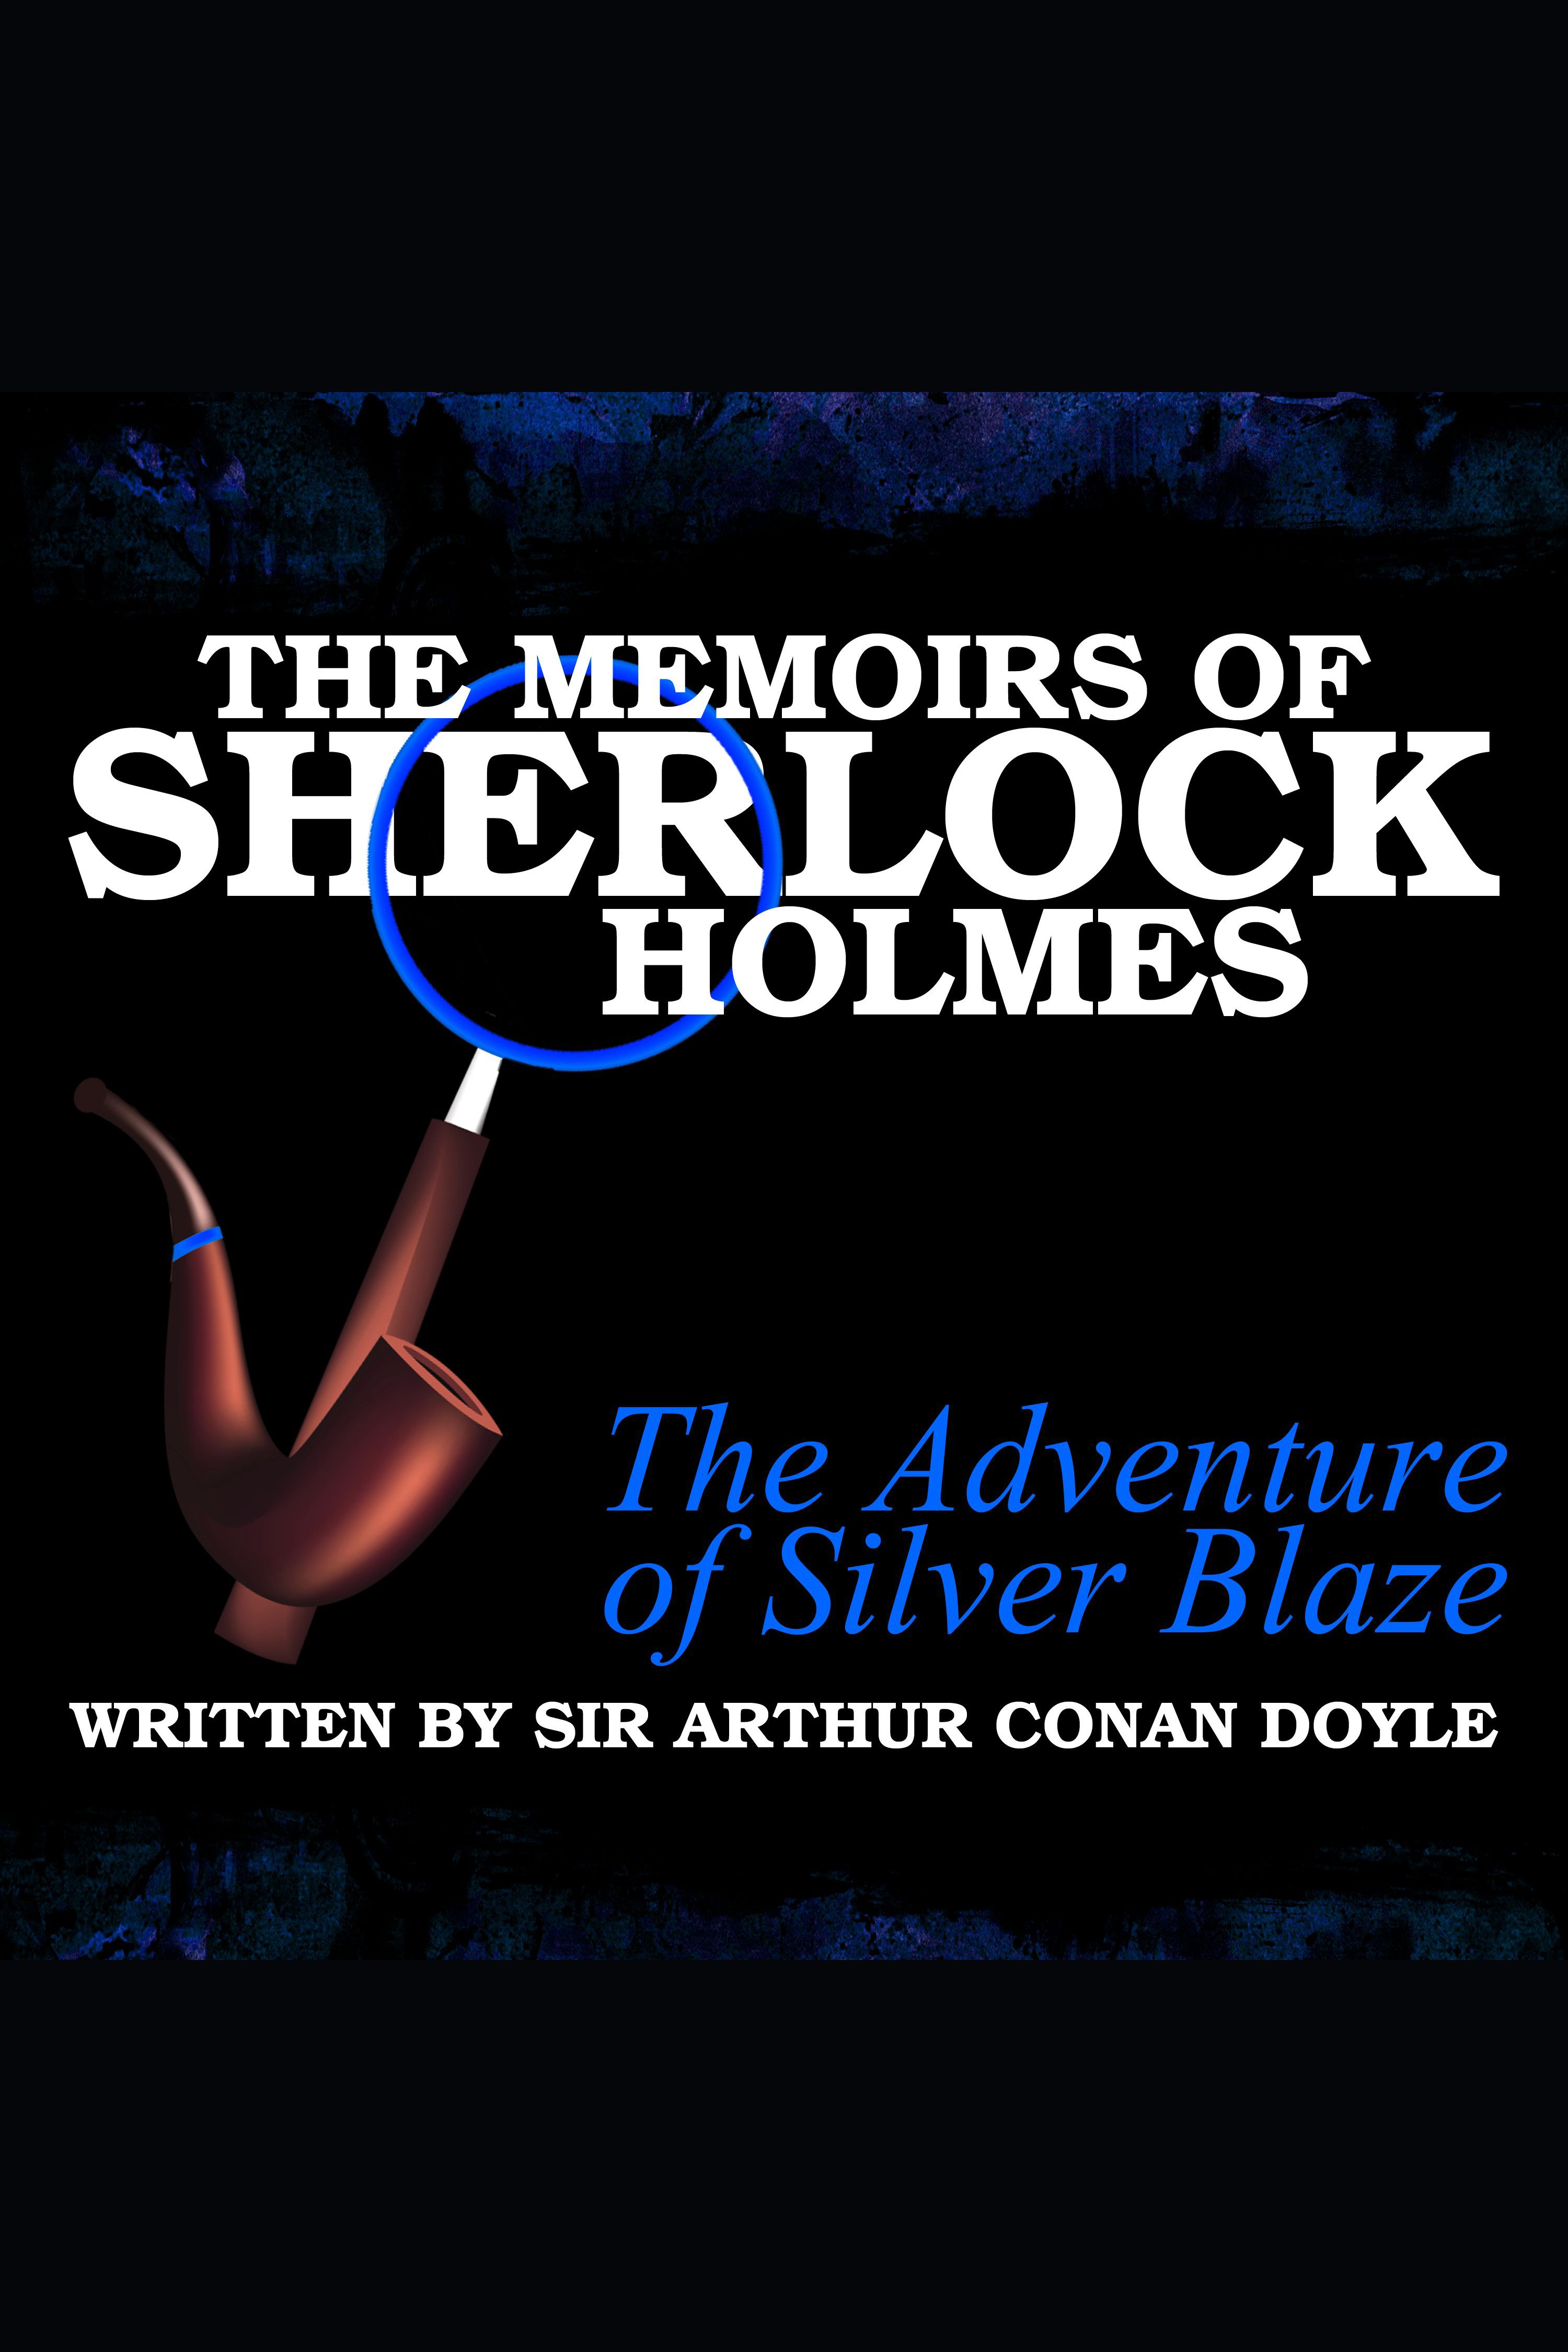 The Memoirs of Sherlock Holmes - The Adventure of Silver Blaze cover image